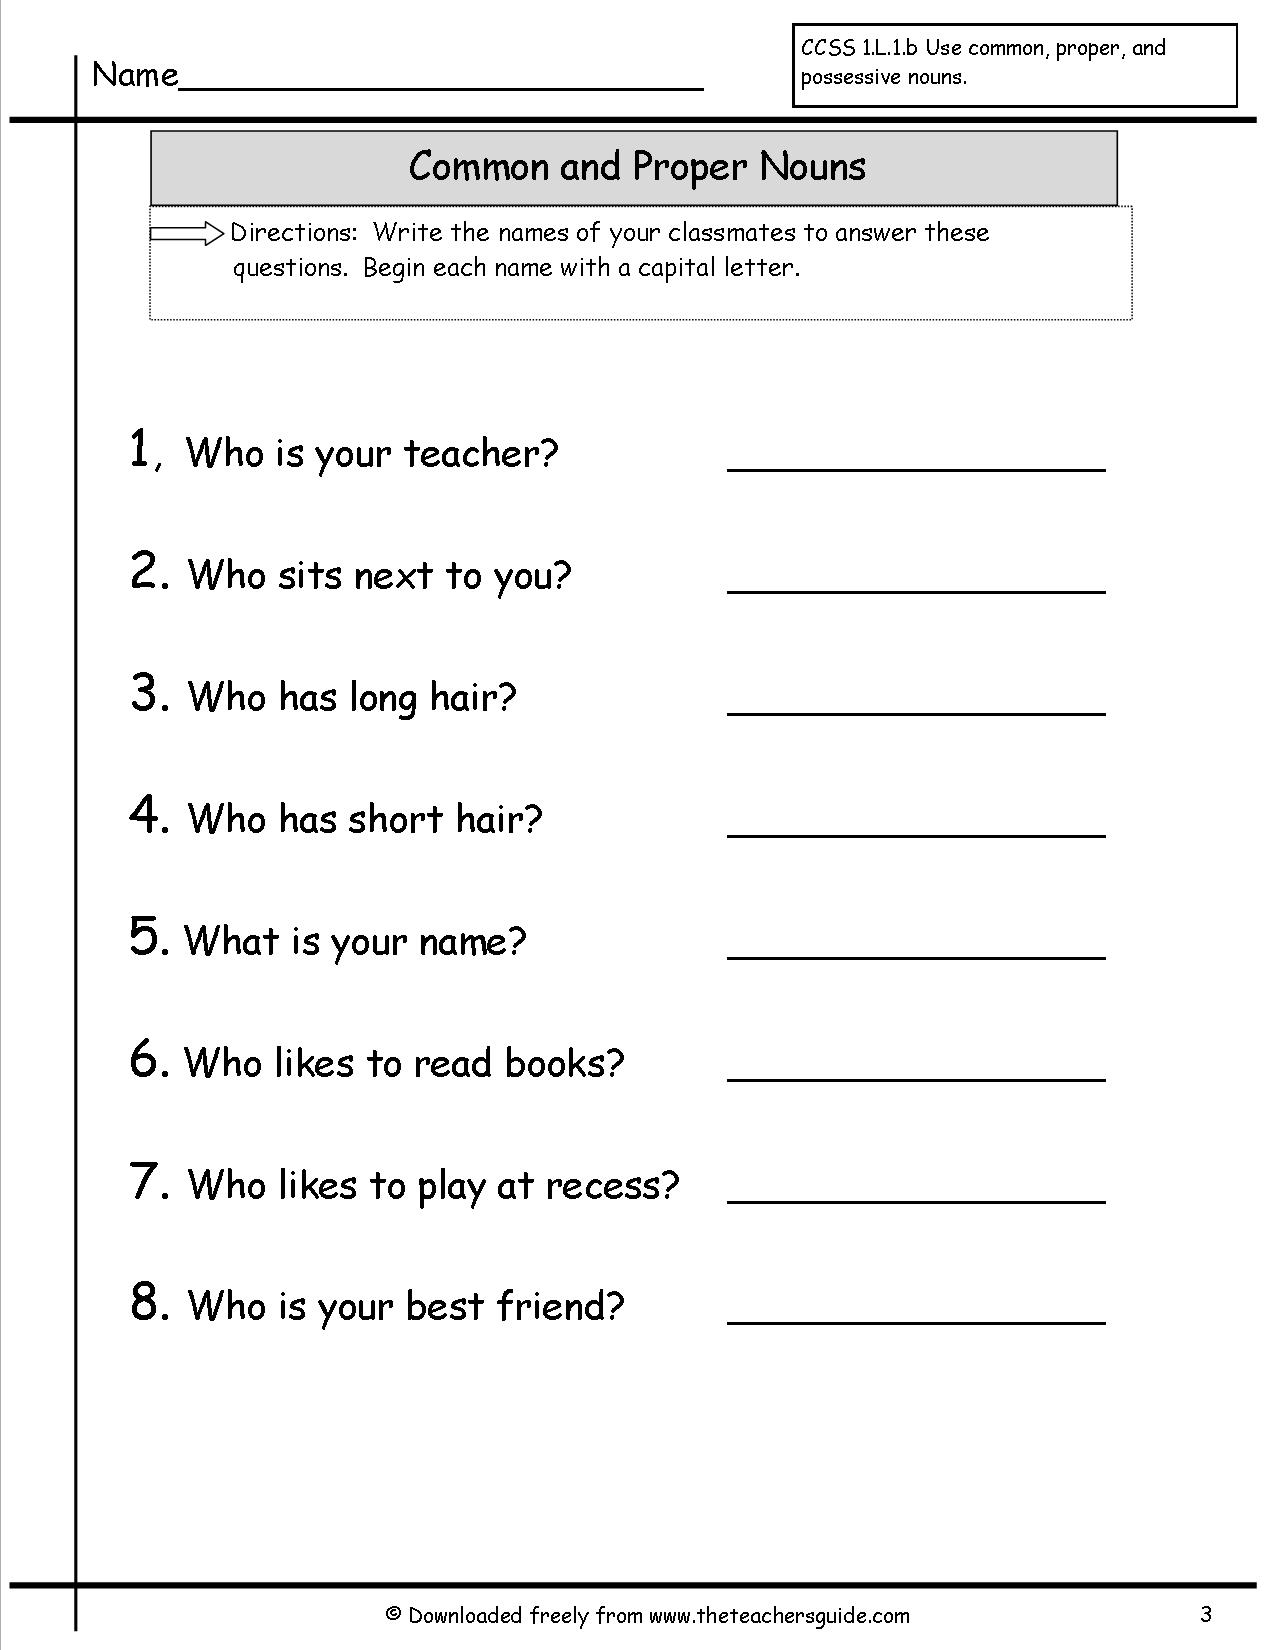 19 Best Images Of 1st Grade Grammar Worksheets Nouns And Verbs Free Noun Worksheets First